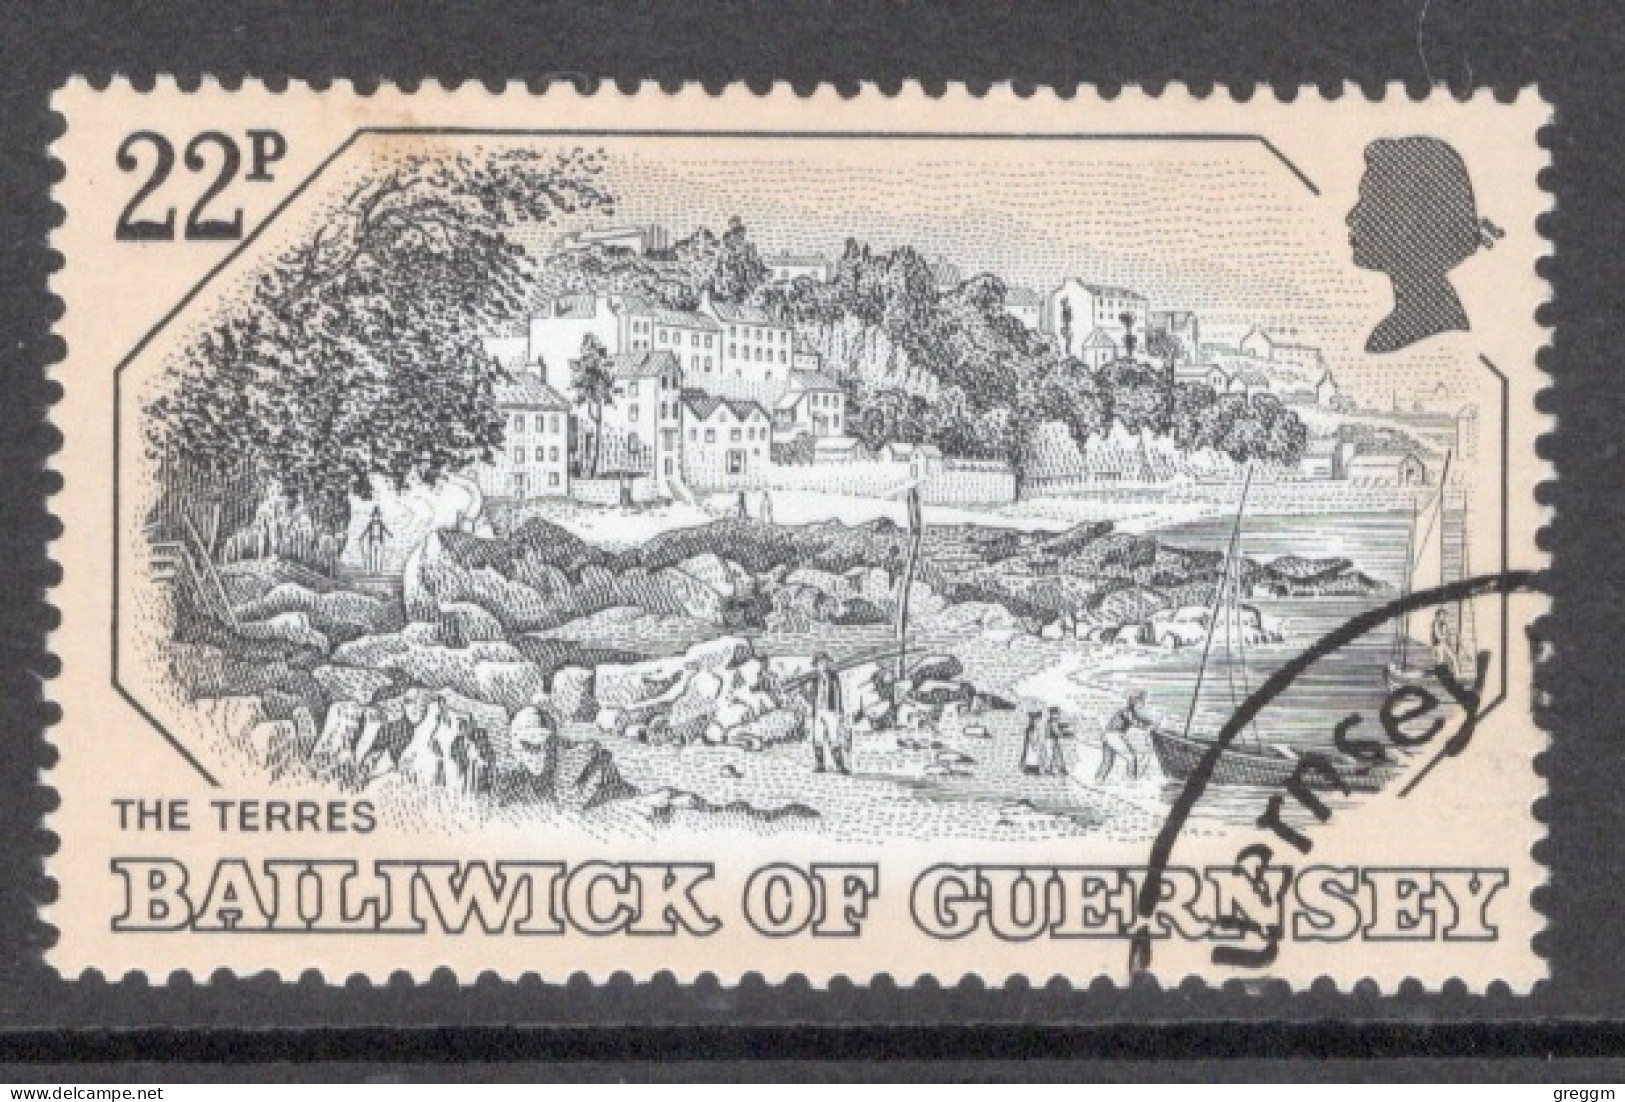 Guernsey 1982  Single Stamp Showing  Old Copperplate Drawings In Fine Used - Guernsey